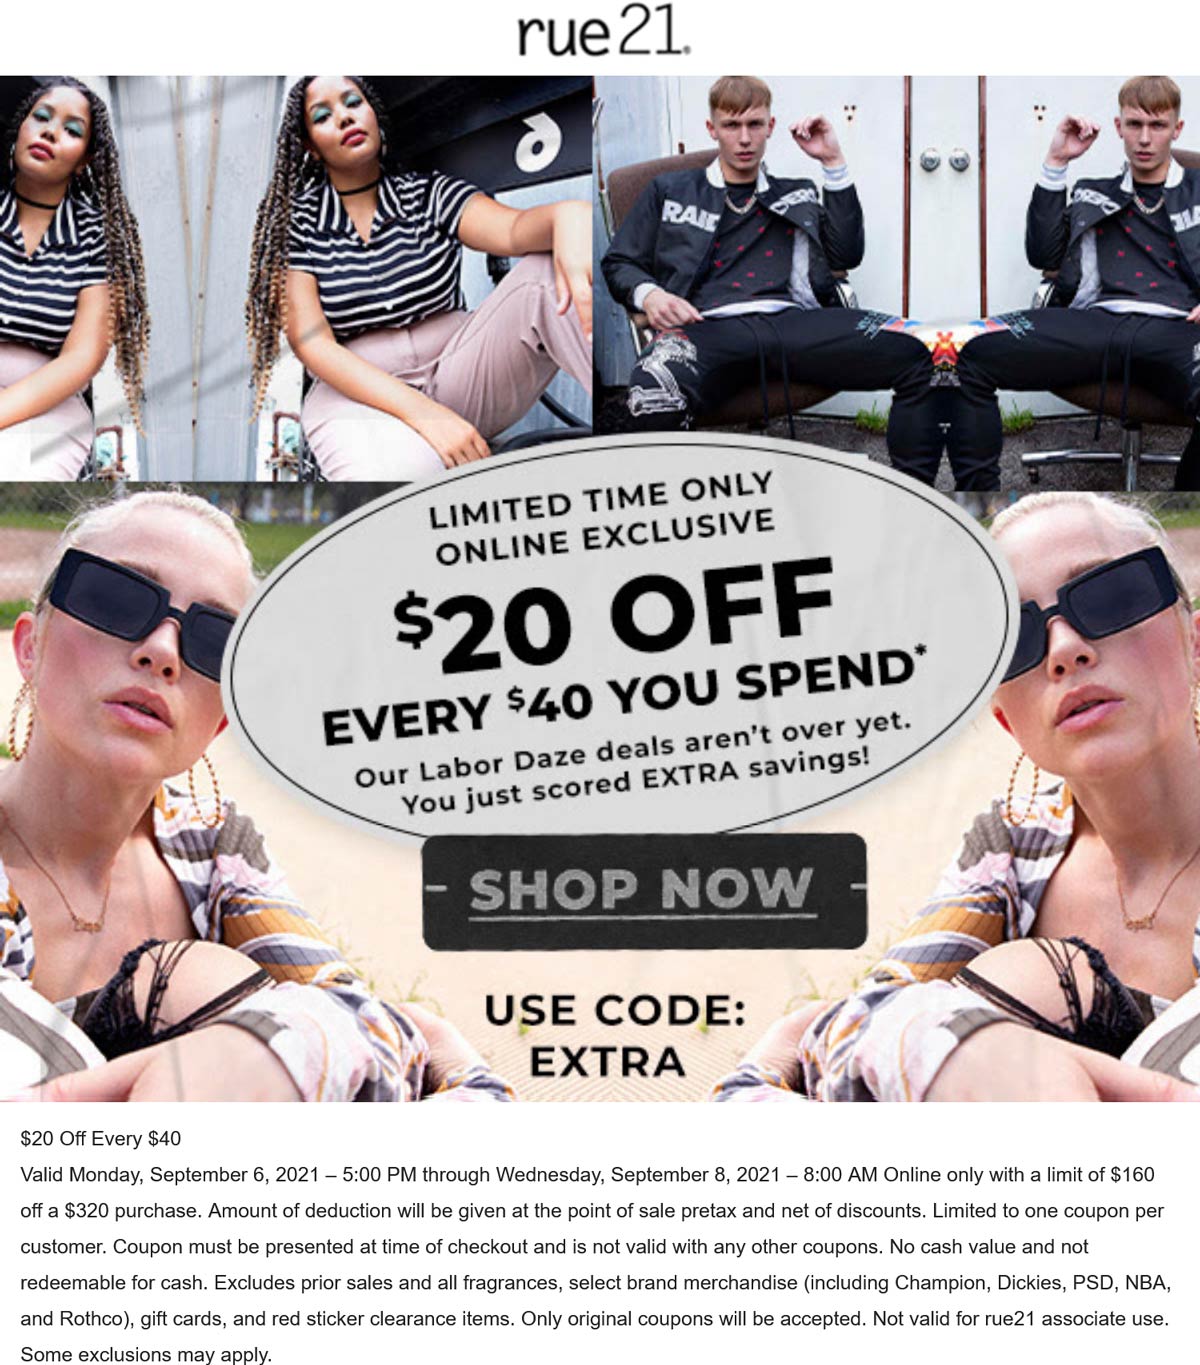 rue21 stores Coupon  $20 off every $40 today at rue21 via promo code EXTRA #rue21 